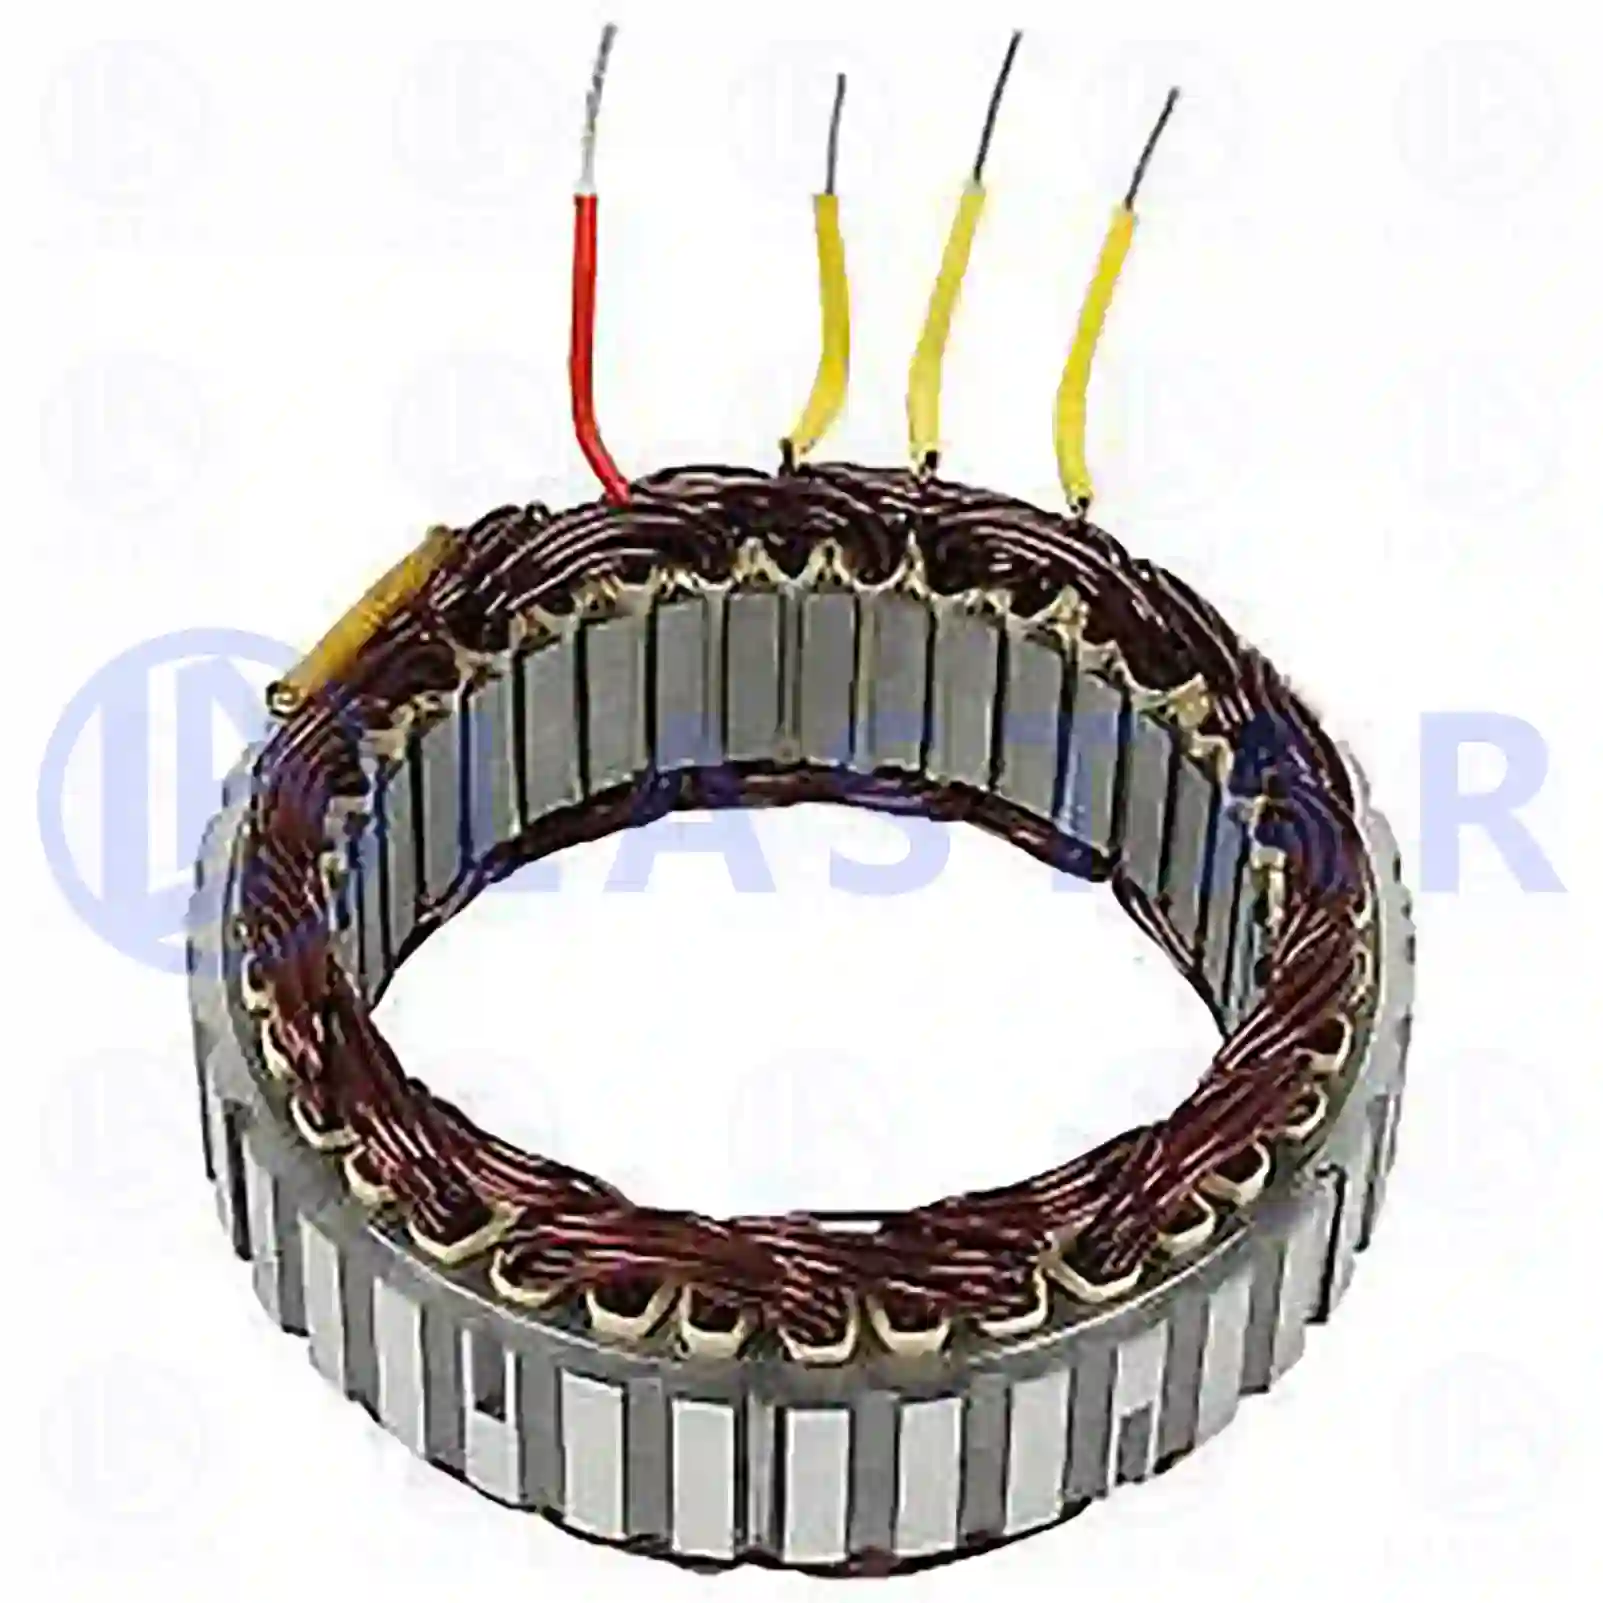 Stator, 77713326, 1387617 ||  77713326 Lastar Spare Part | Truck Spare Parts, Auotomotive Spare Parts Stator, 77713326, 1387617 ||  77713326 Lastar Spare Part | Truck Spare Parts, Auotomotive Spare Parts